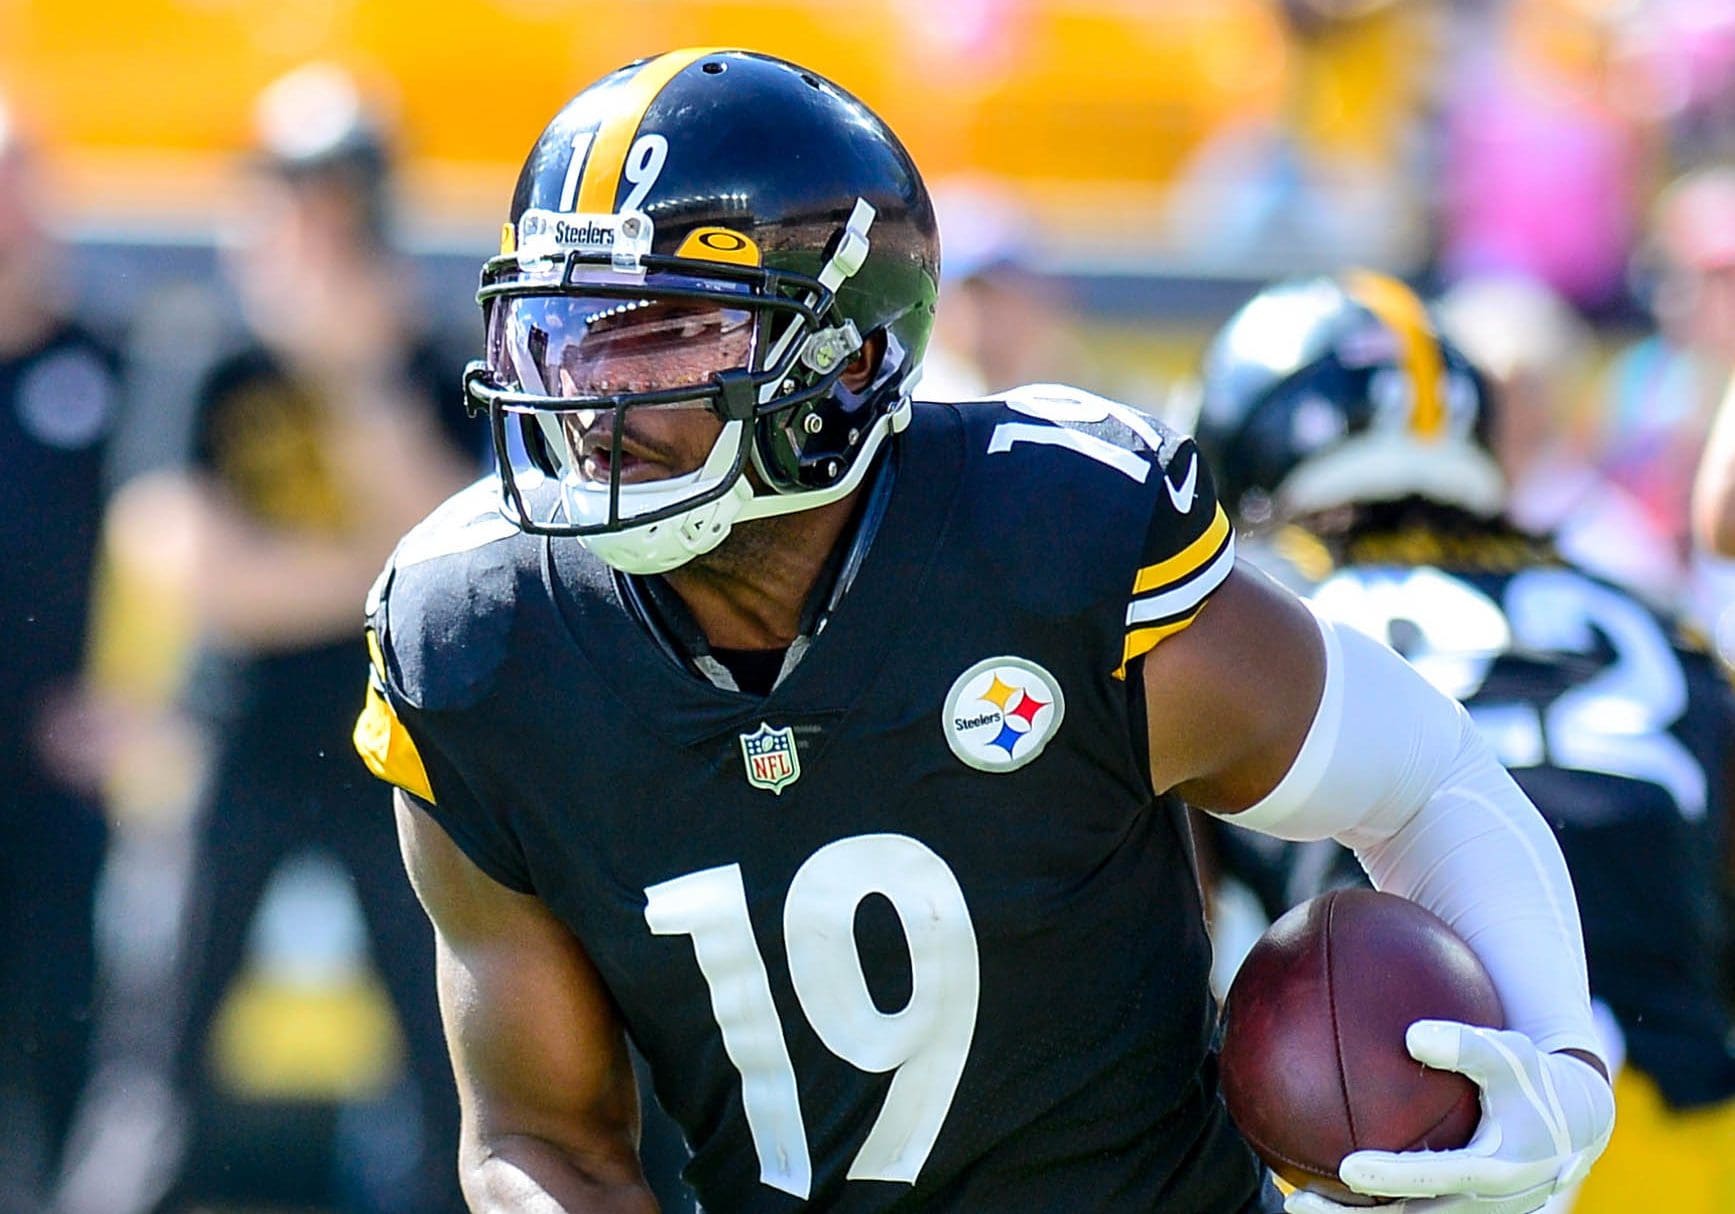 I Love Pittsburgh': JuJu Smith-Schuster Cherishes Time Spent With Steelers